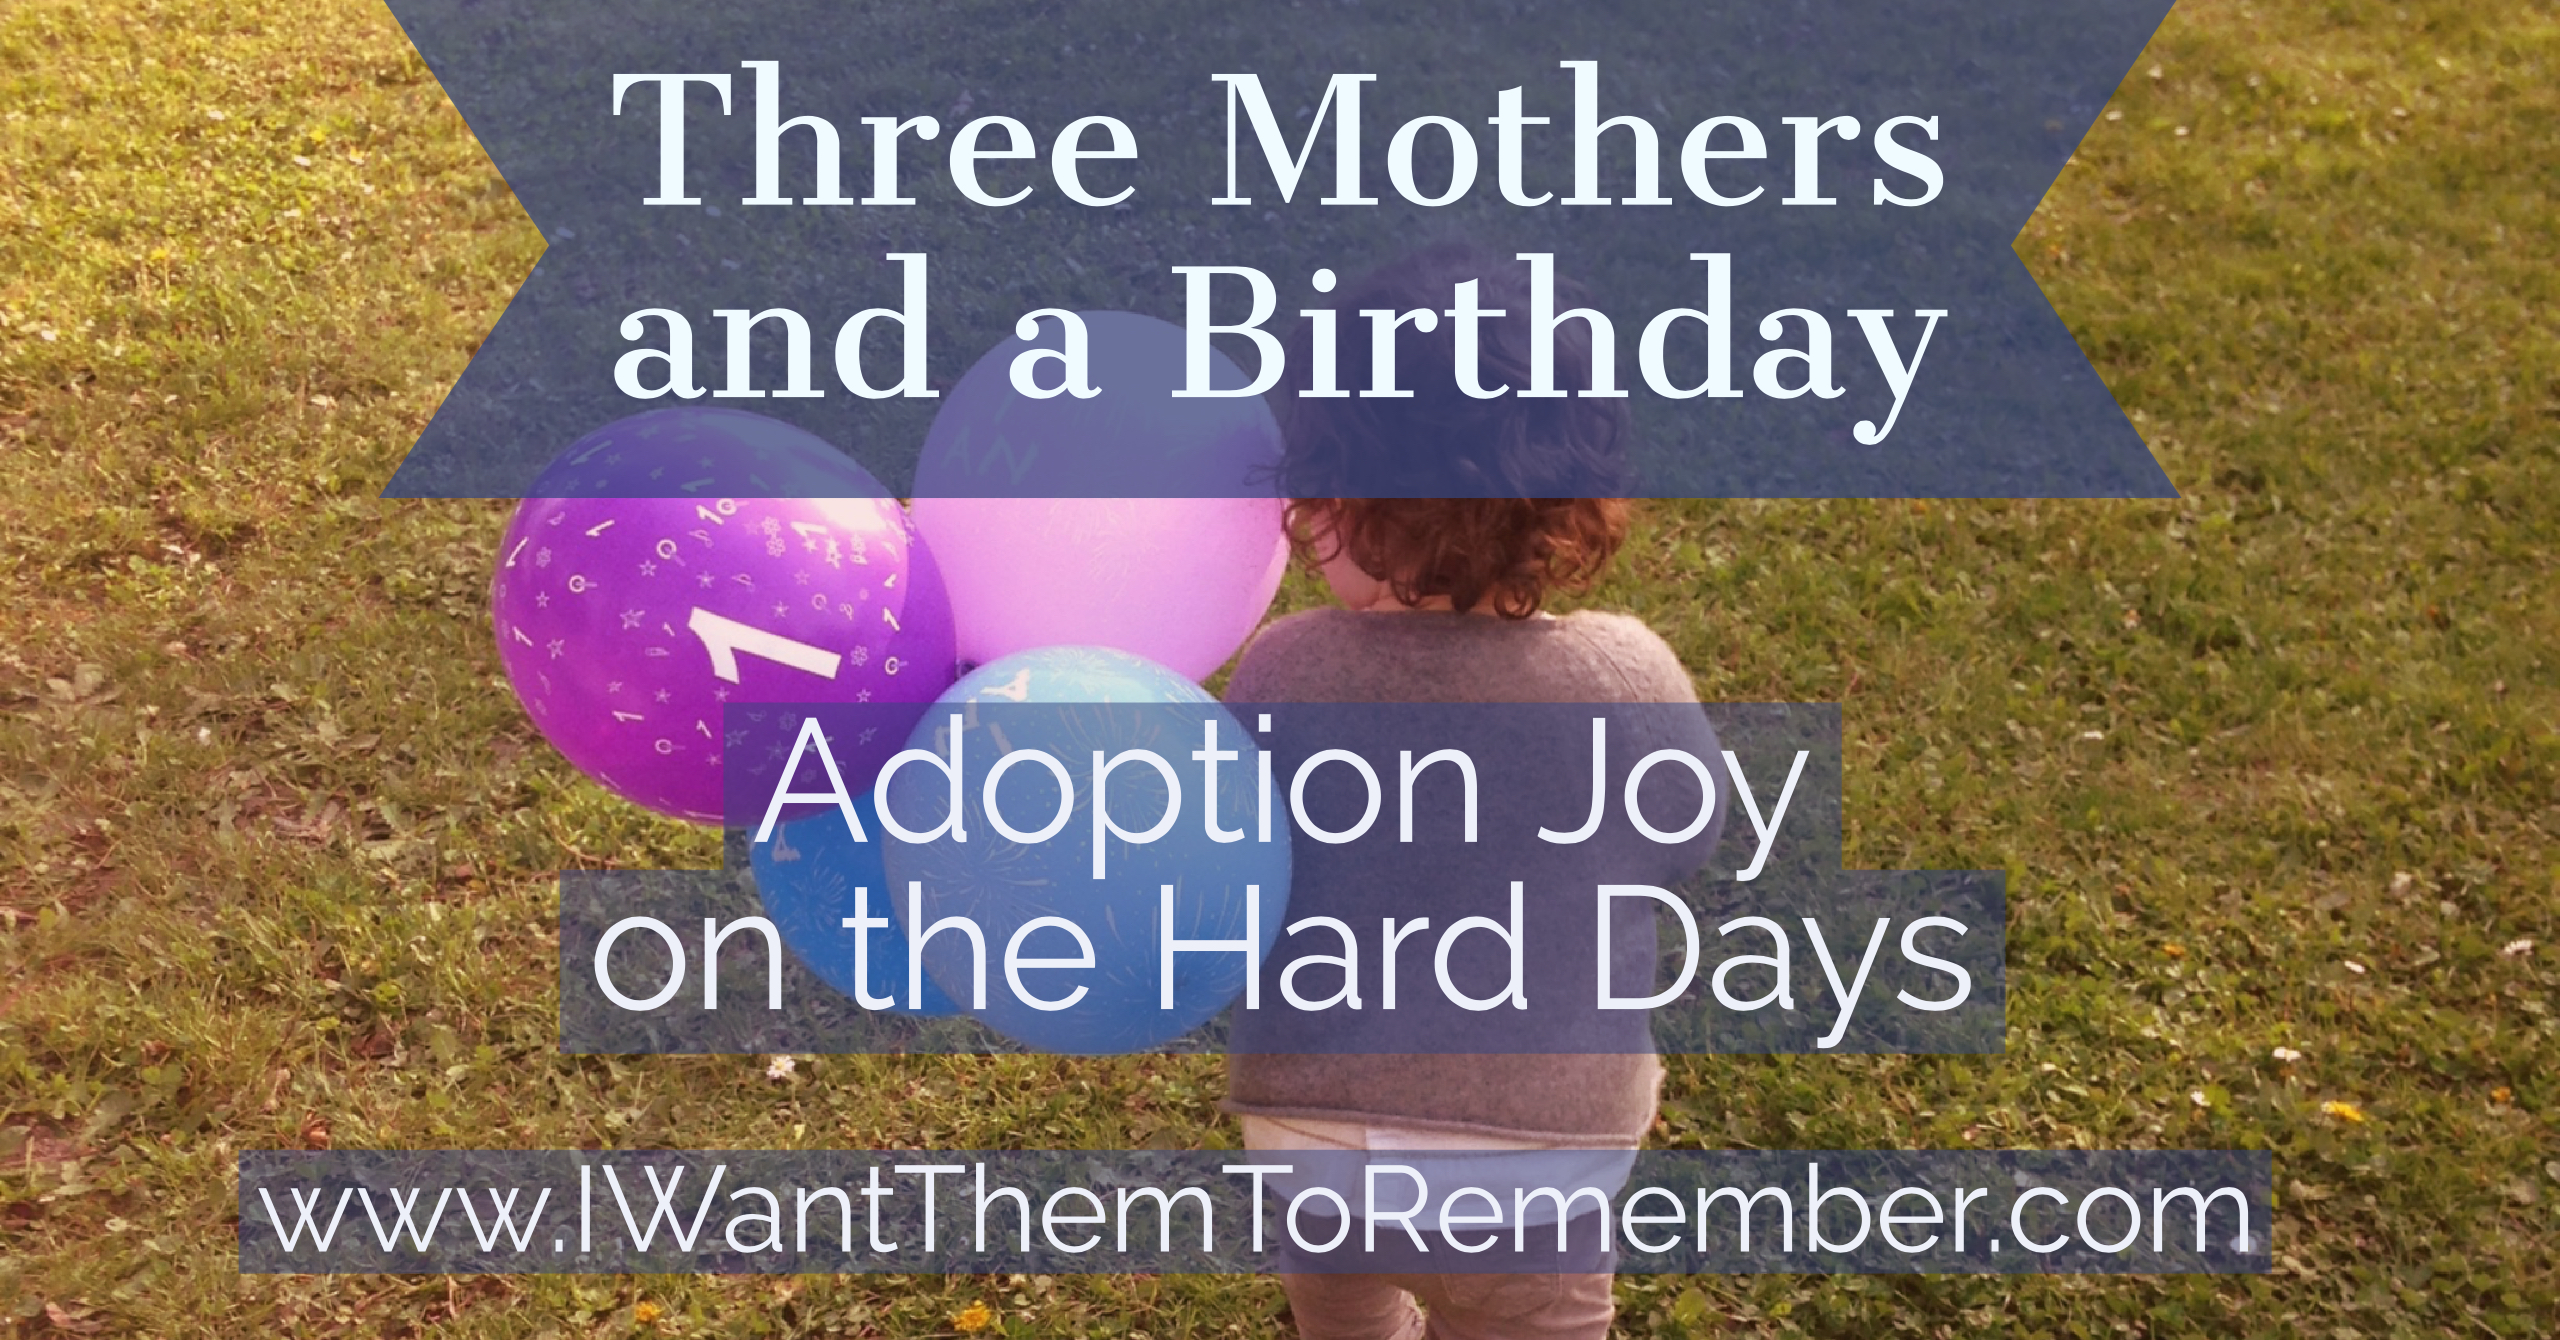 3 Mothers and a Birthday: Adoption Joy on the Hard Days